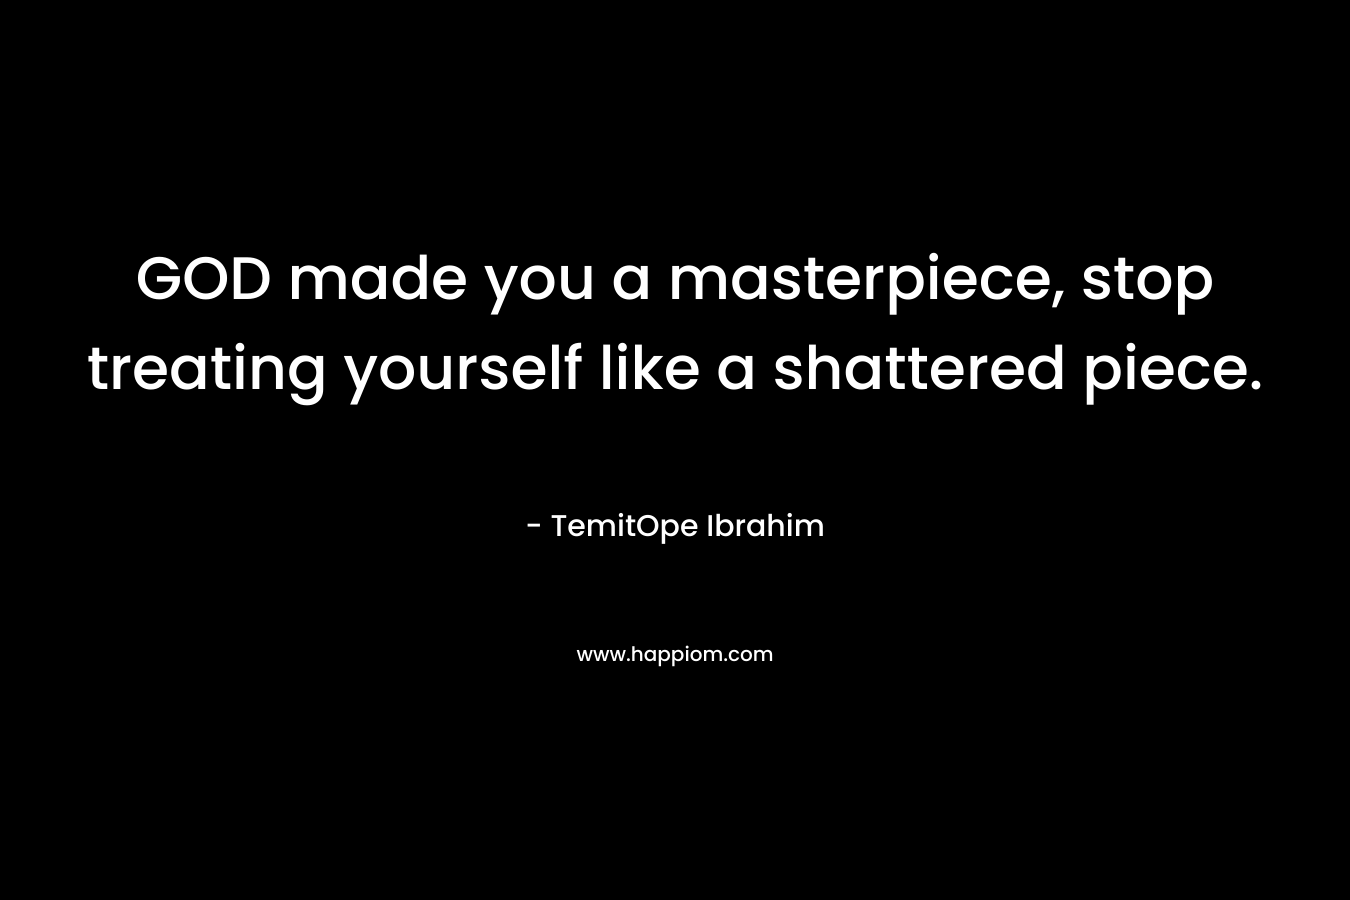 GOD made you a masterpiece, stop treating yourself like a shattered piece.